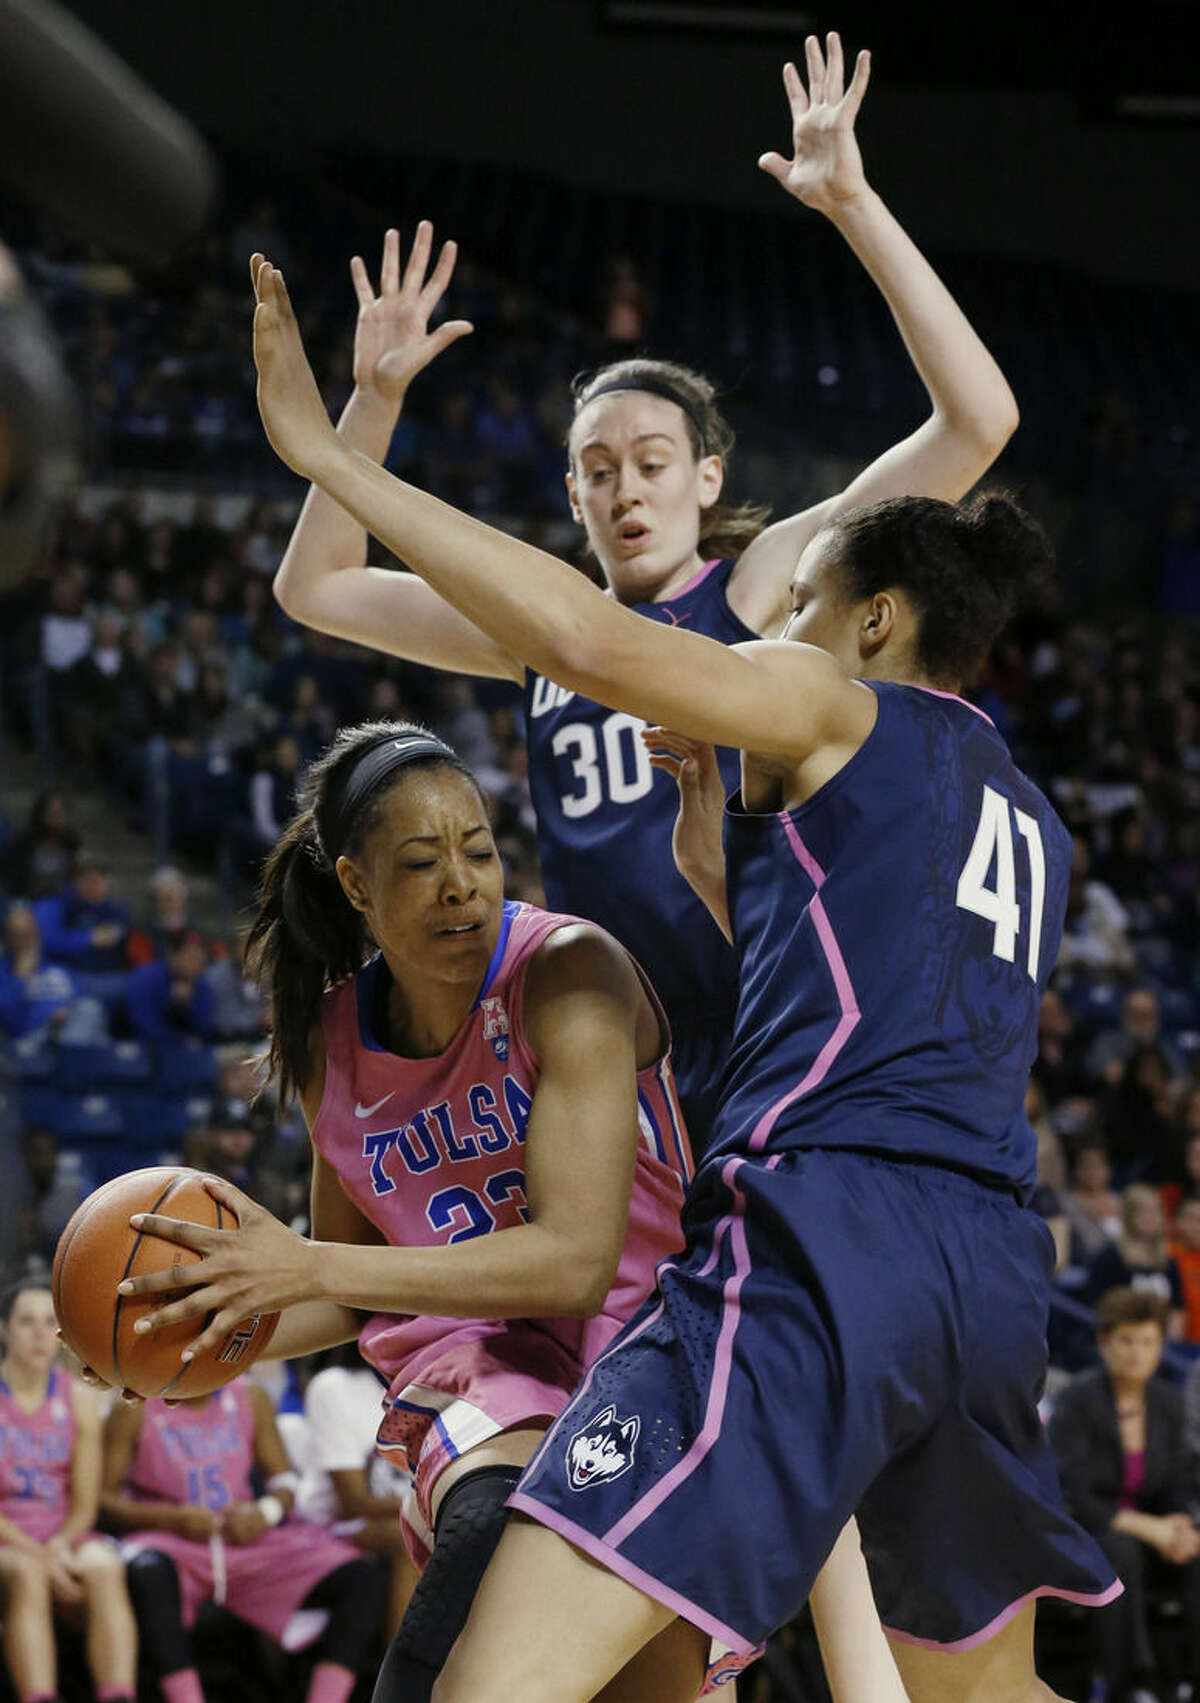 Tulsa guard Ashley Clark (23) is defended by Connecticut forward Breanna Stewart (30) and center Kiah Stokes (41) in the second half of NCAA college basketball game in Tulsa, Okla., Saturday, Feb. 21, 2015. Connecticut won 92-46. (AP Photo/Sue Ogrocki)